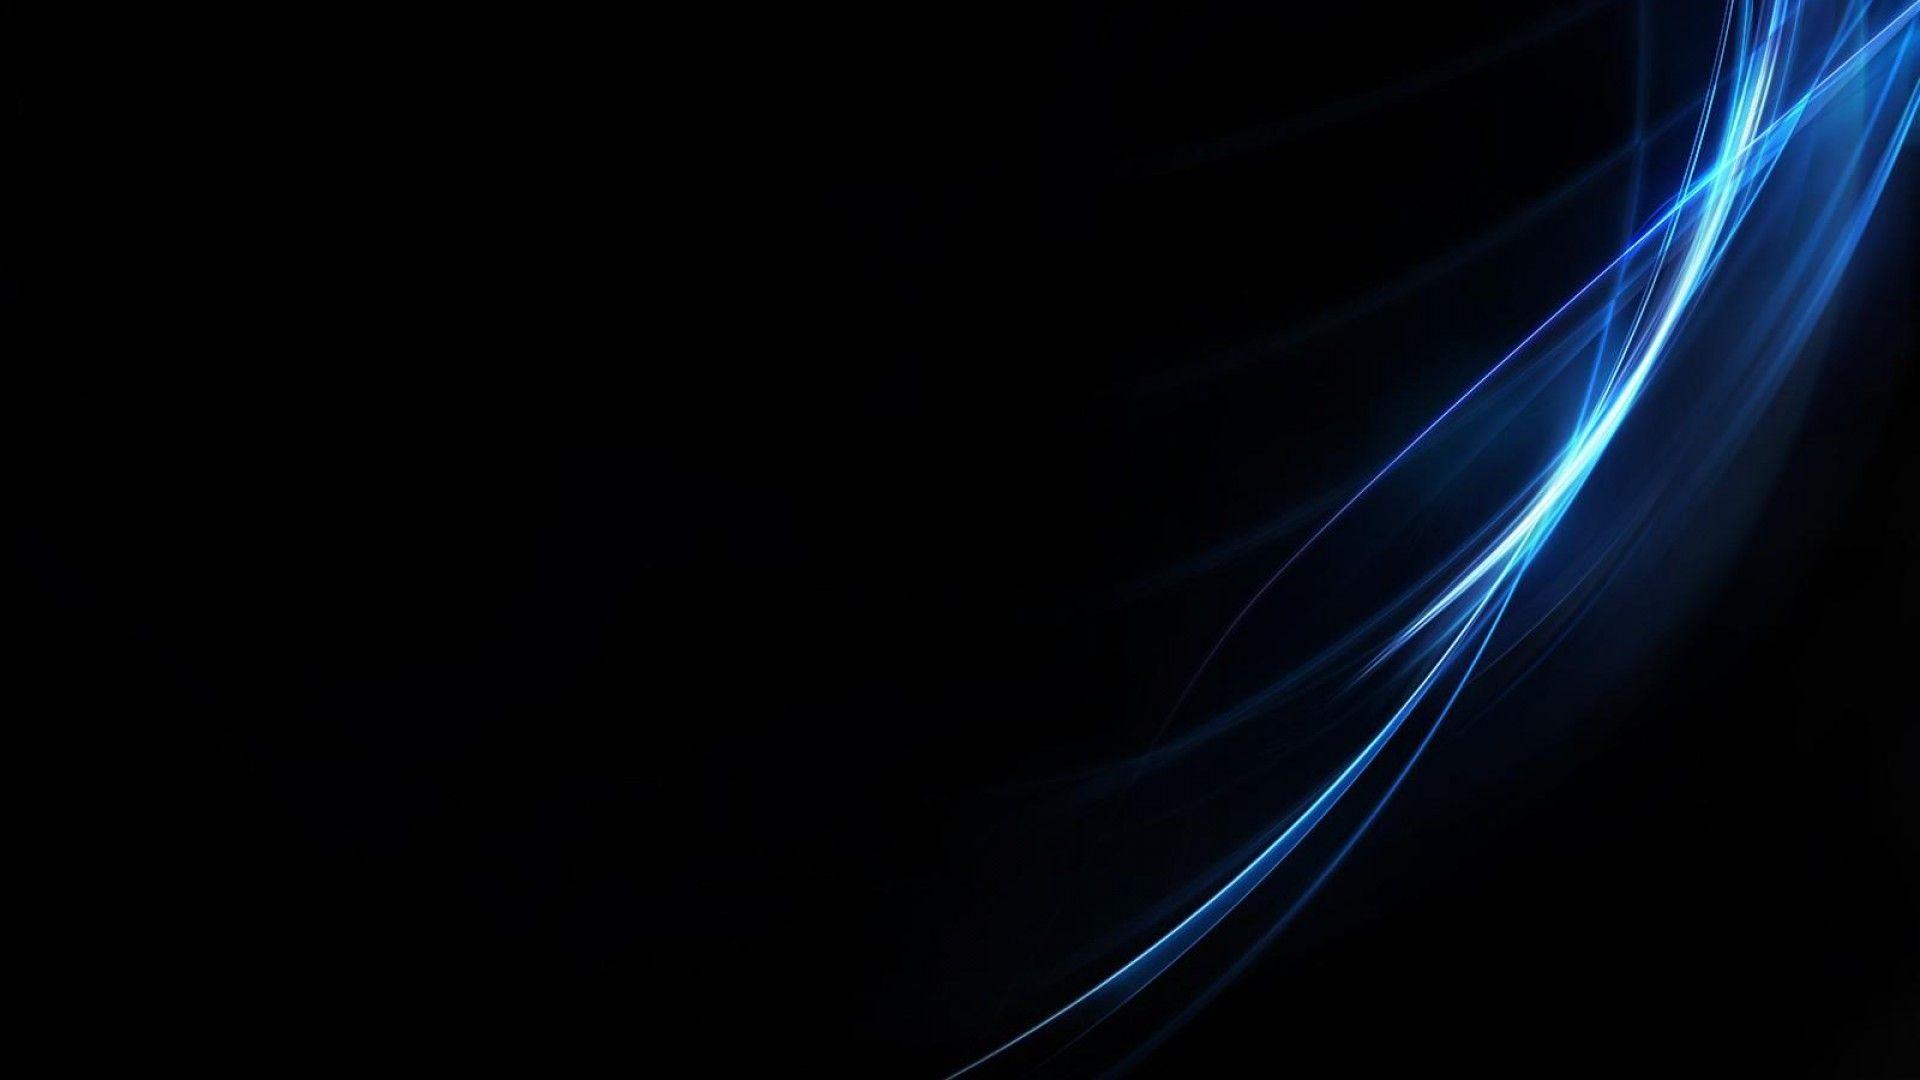 Blue and Black Background Wallpaper